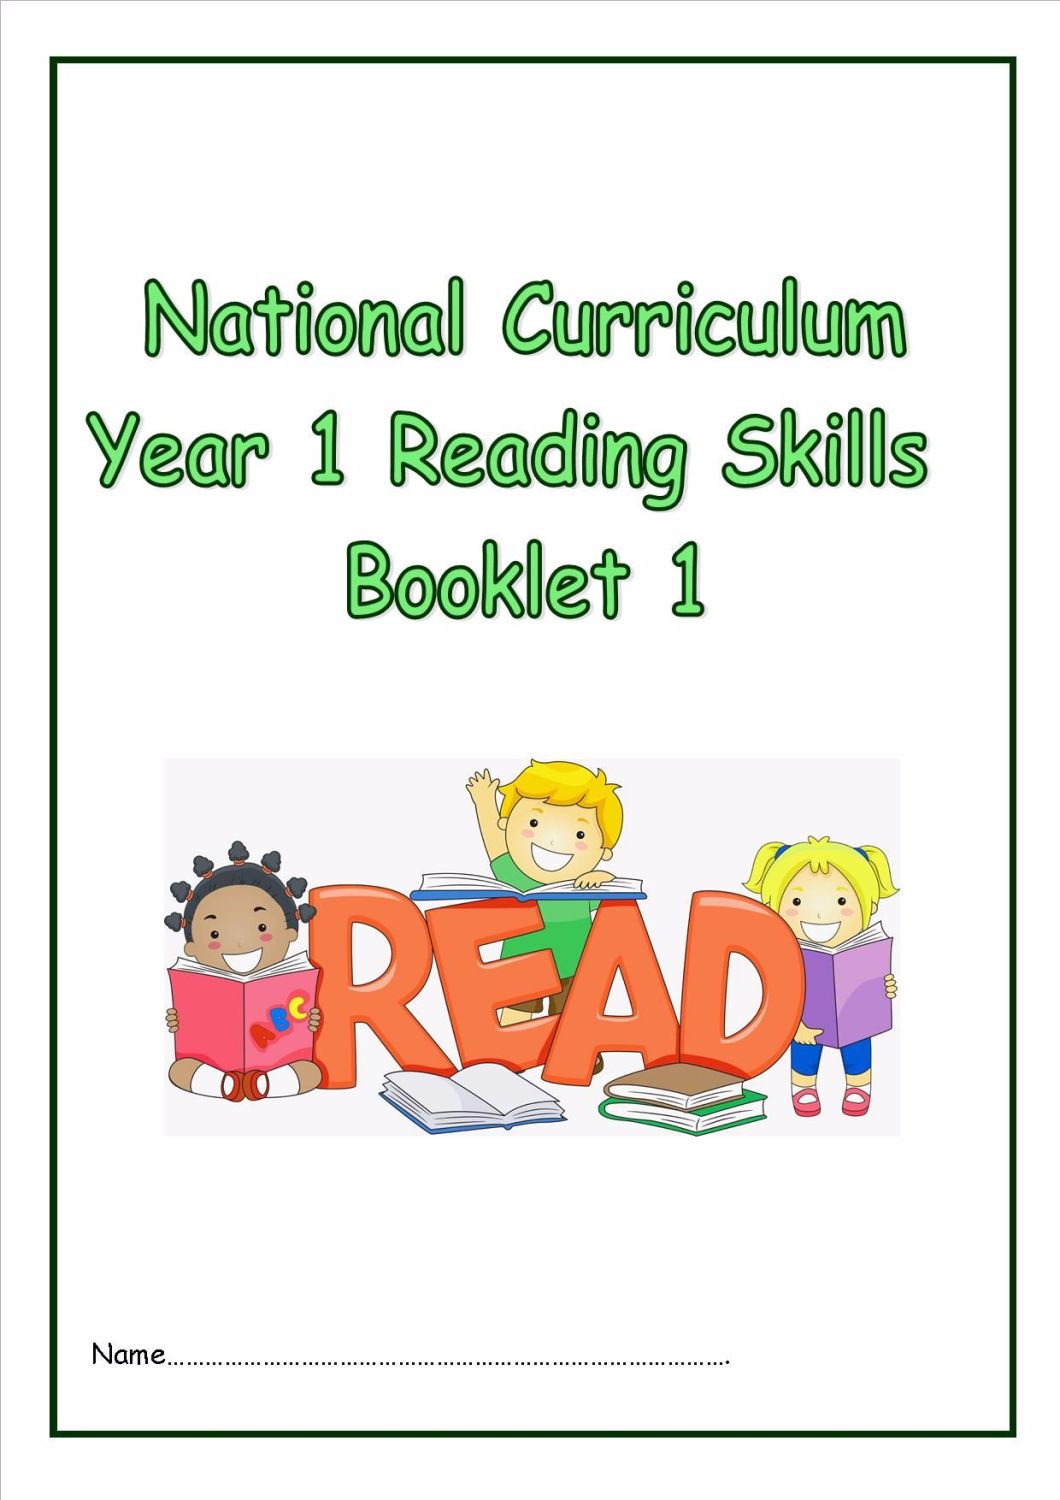 National Curriculum, Year 1, Reading Skills Booklet 1